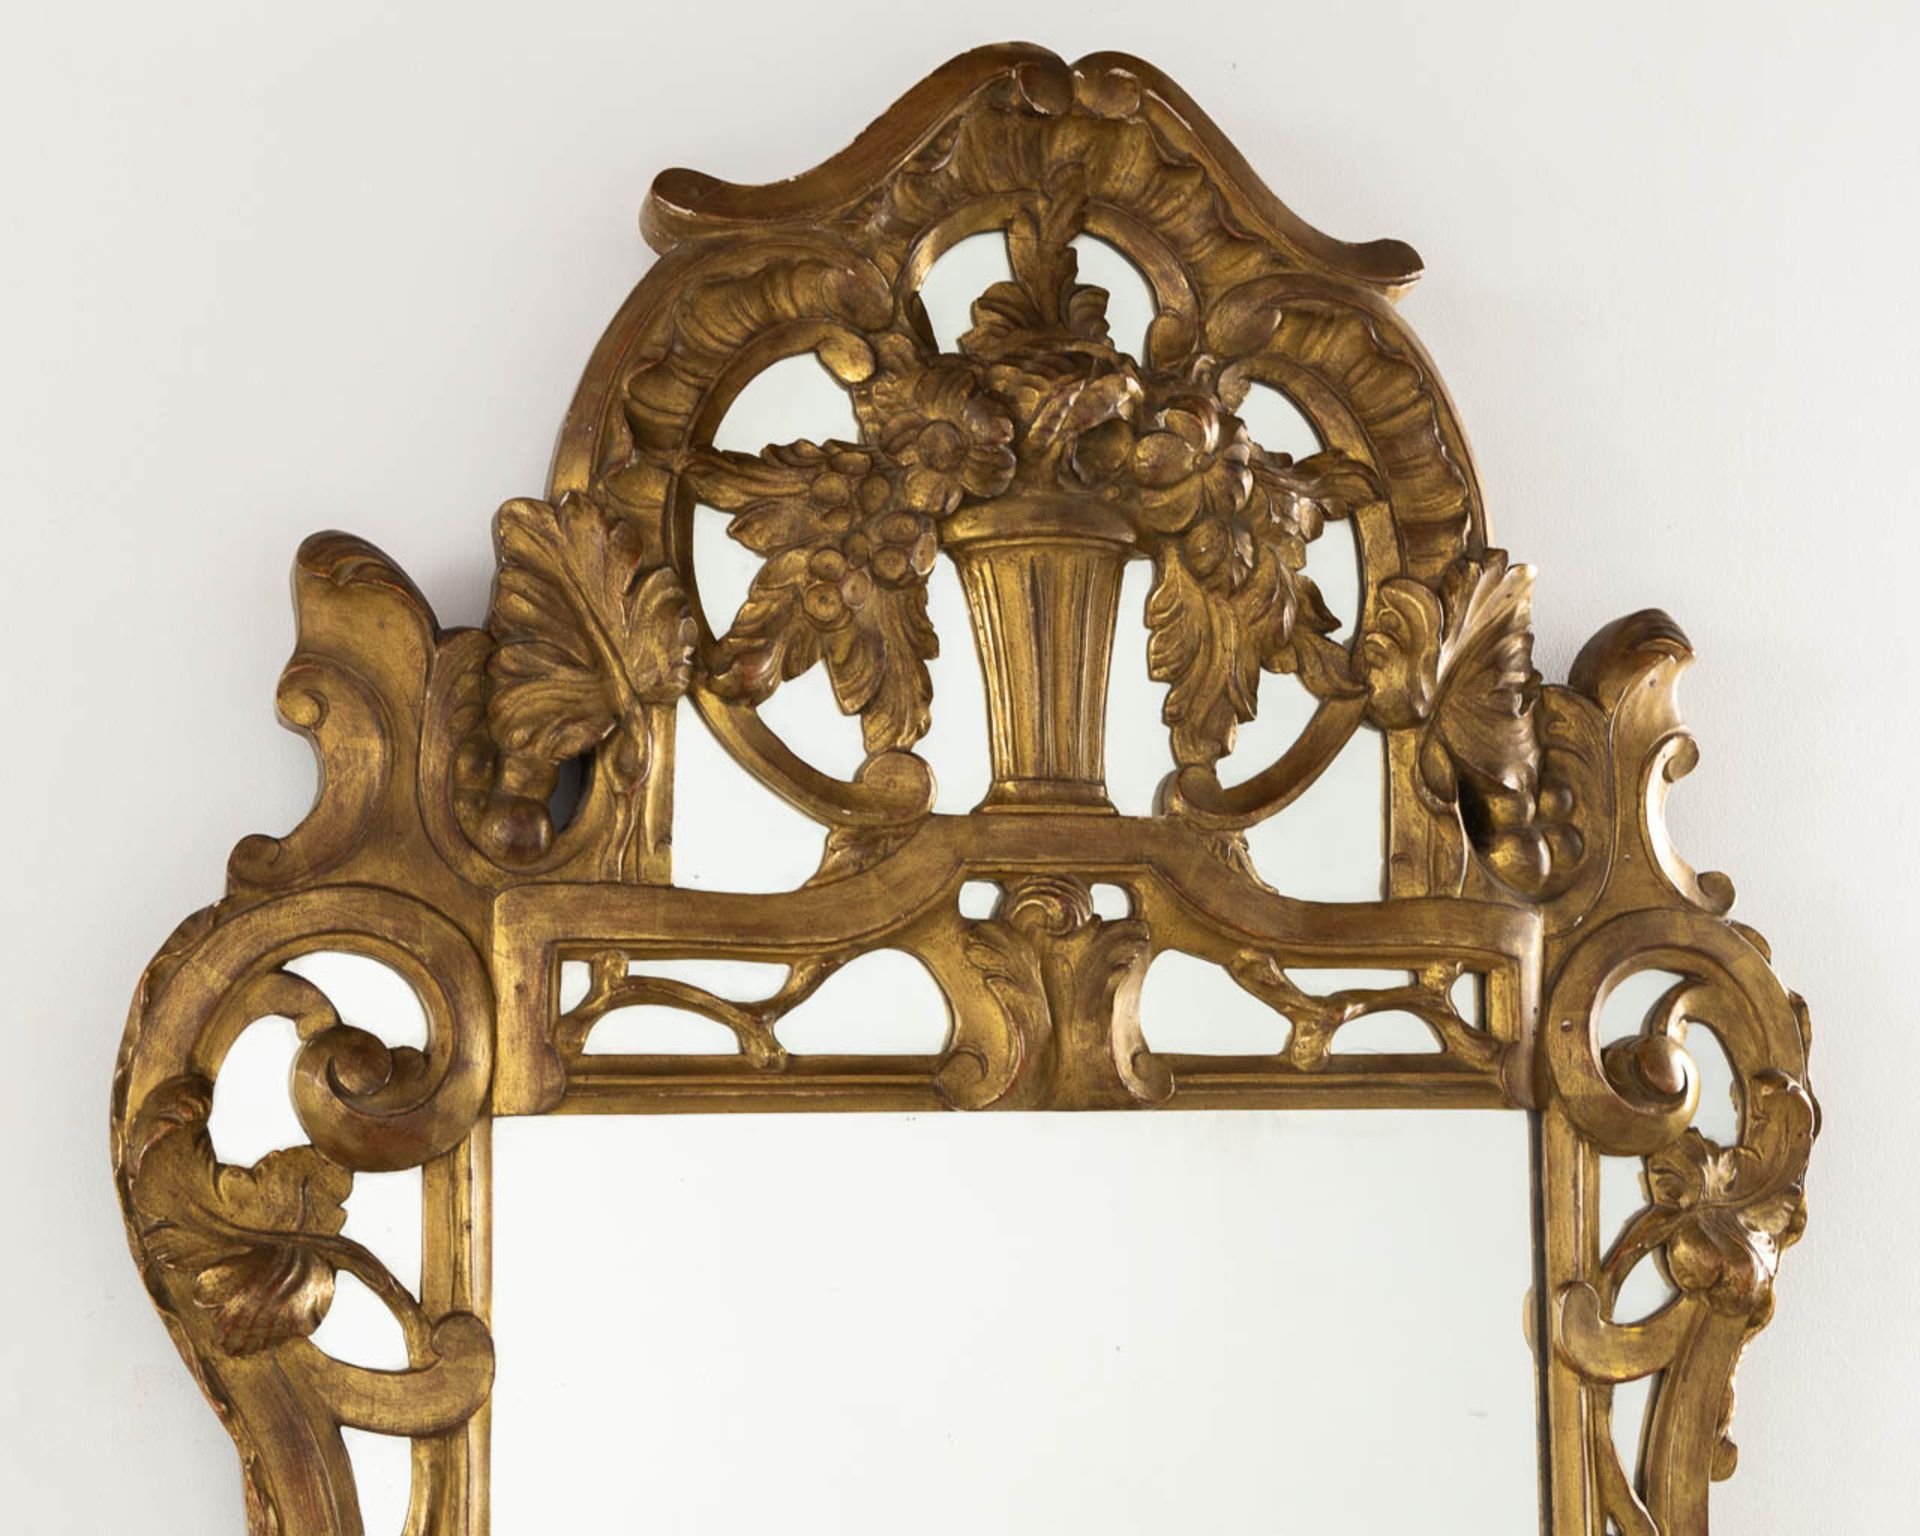 An antique, wood-sculptured and gilt mirror, France, 20th C. (W:74 x H:130 cm) - Image 3 of 7